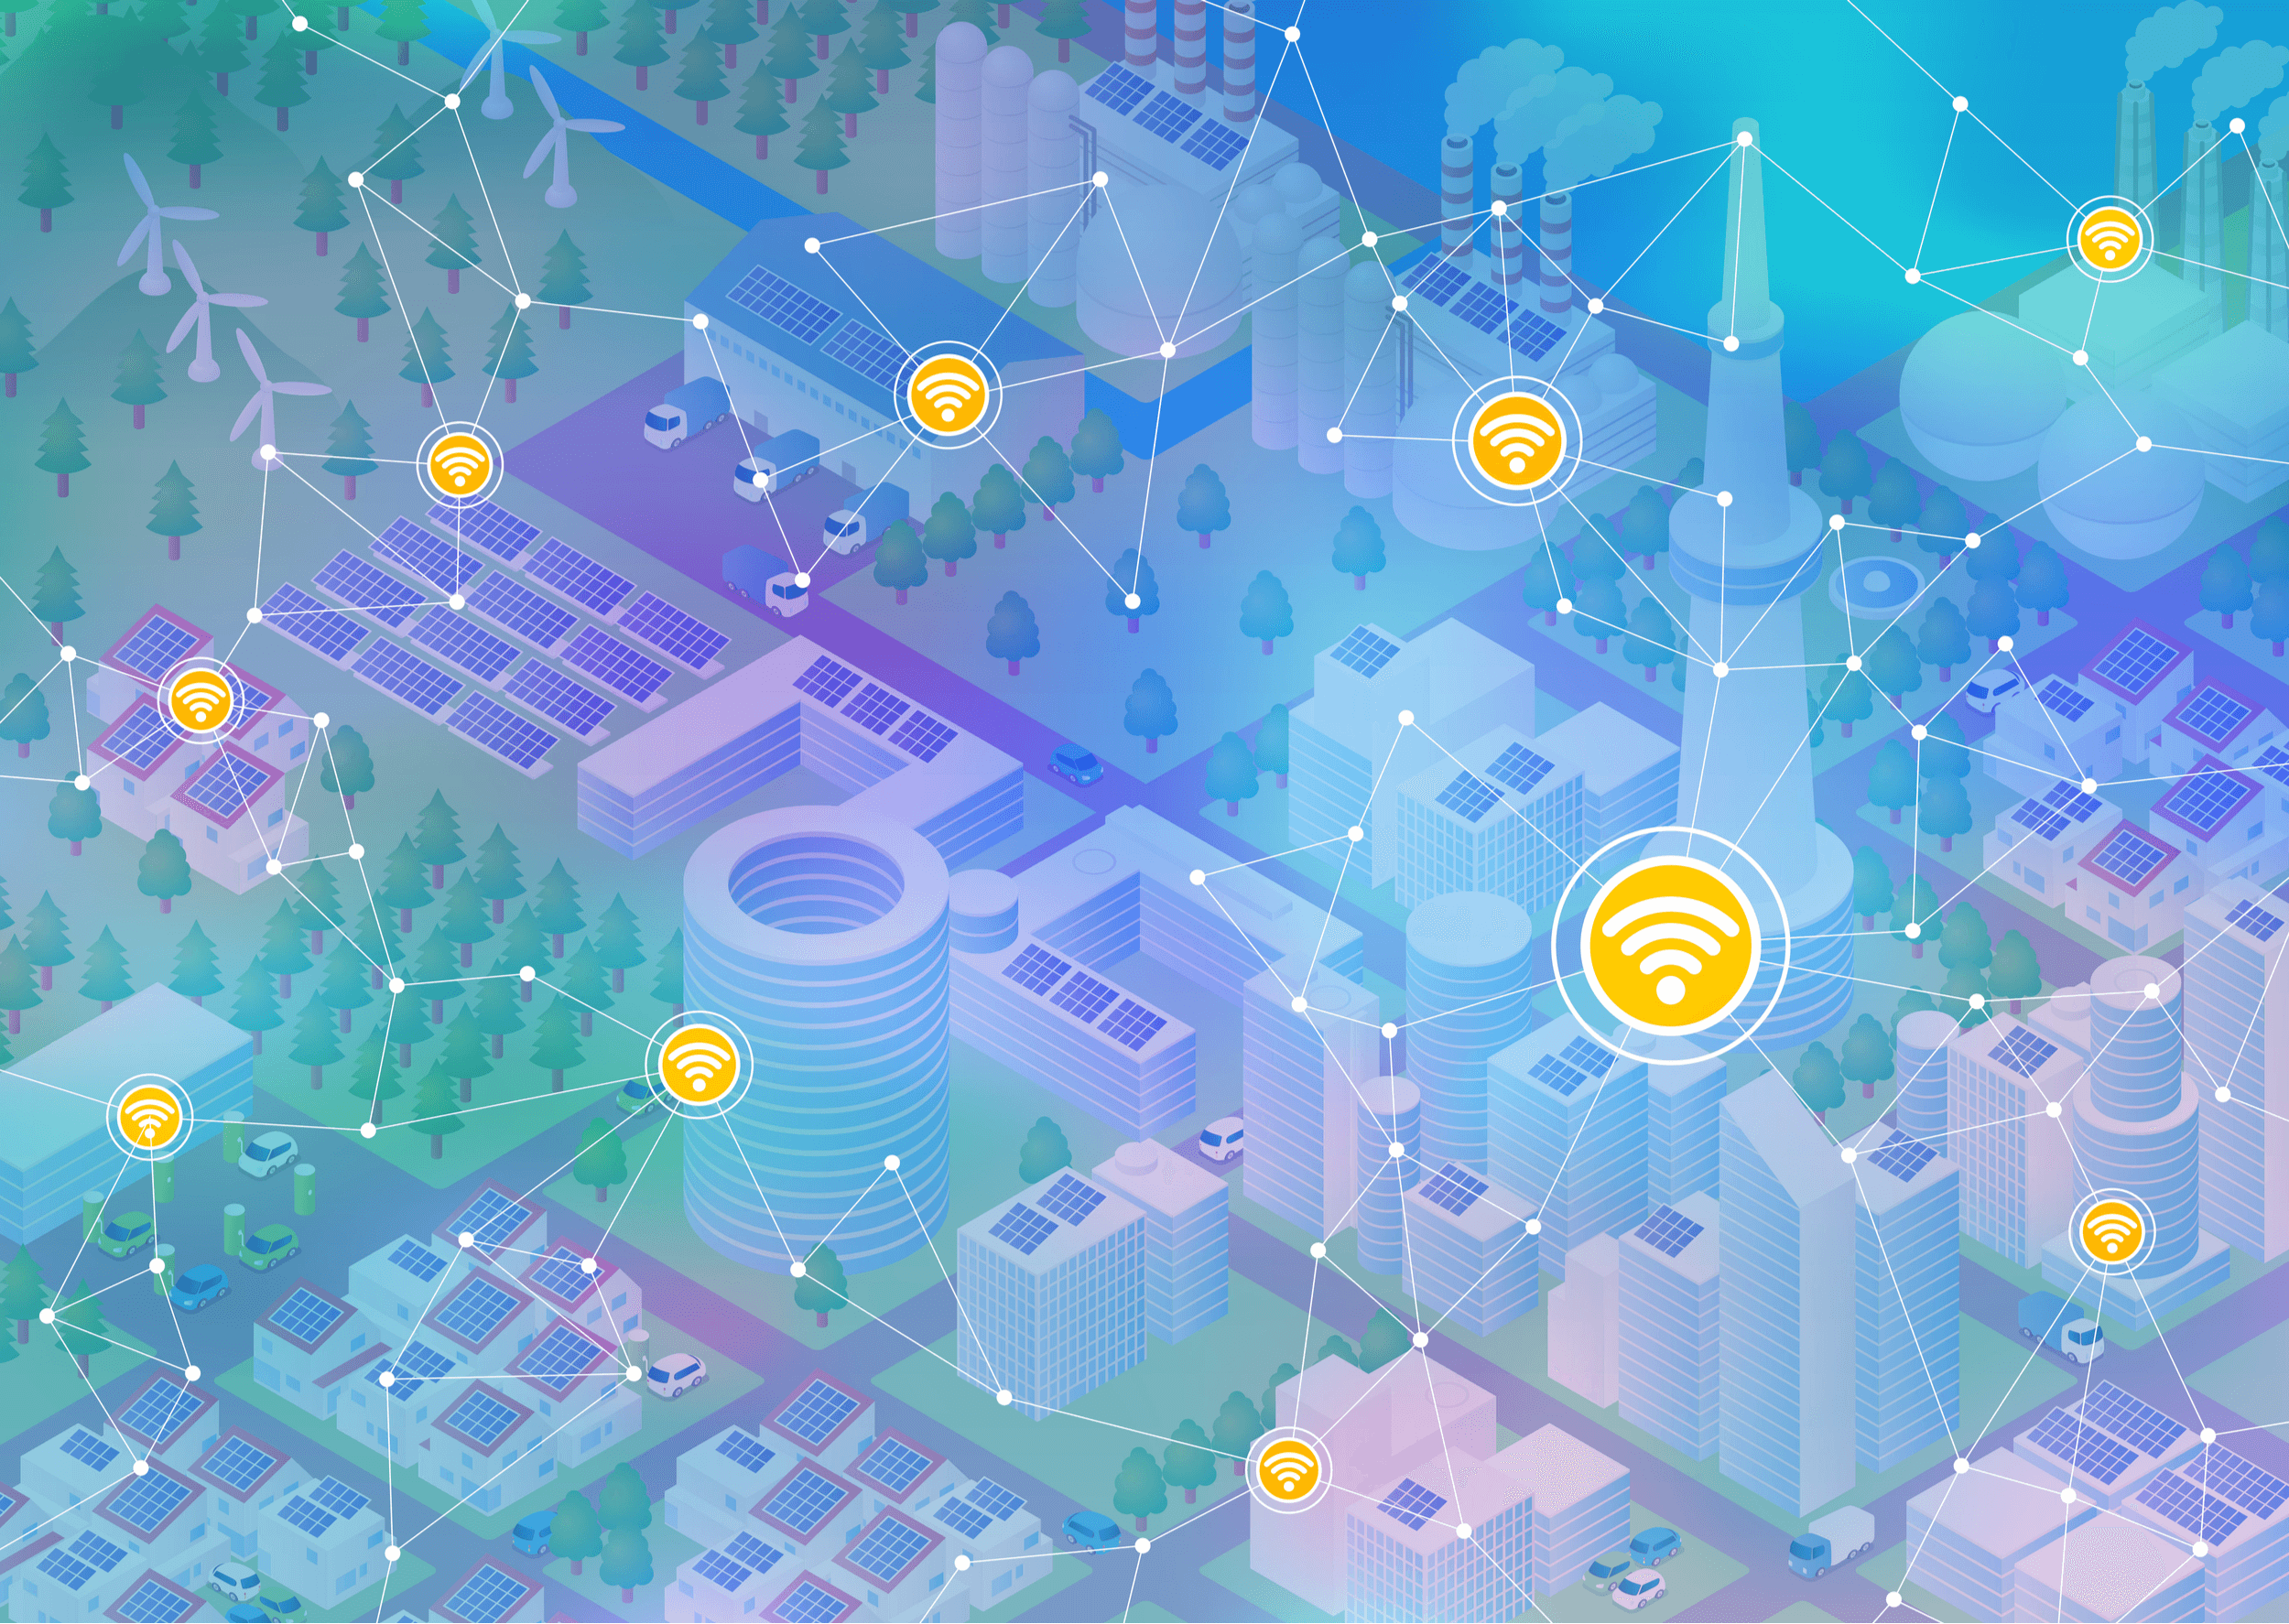 Internet of things, city and buildings, sensor network, abstract image vector illustration